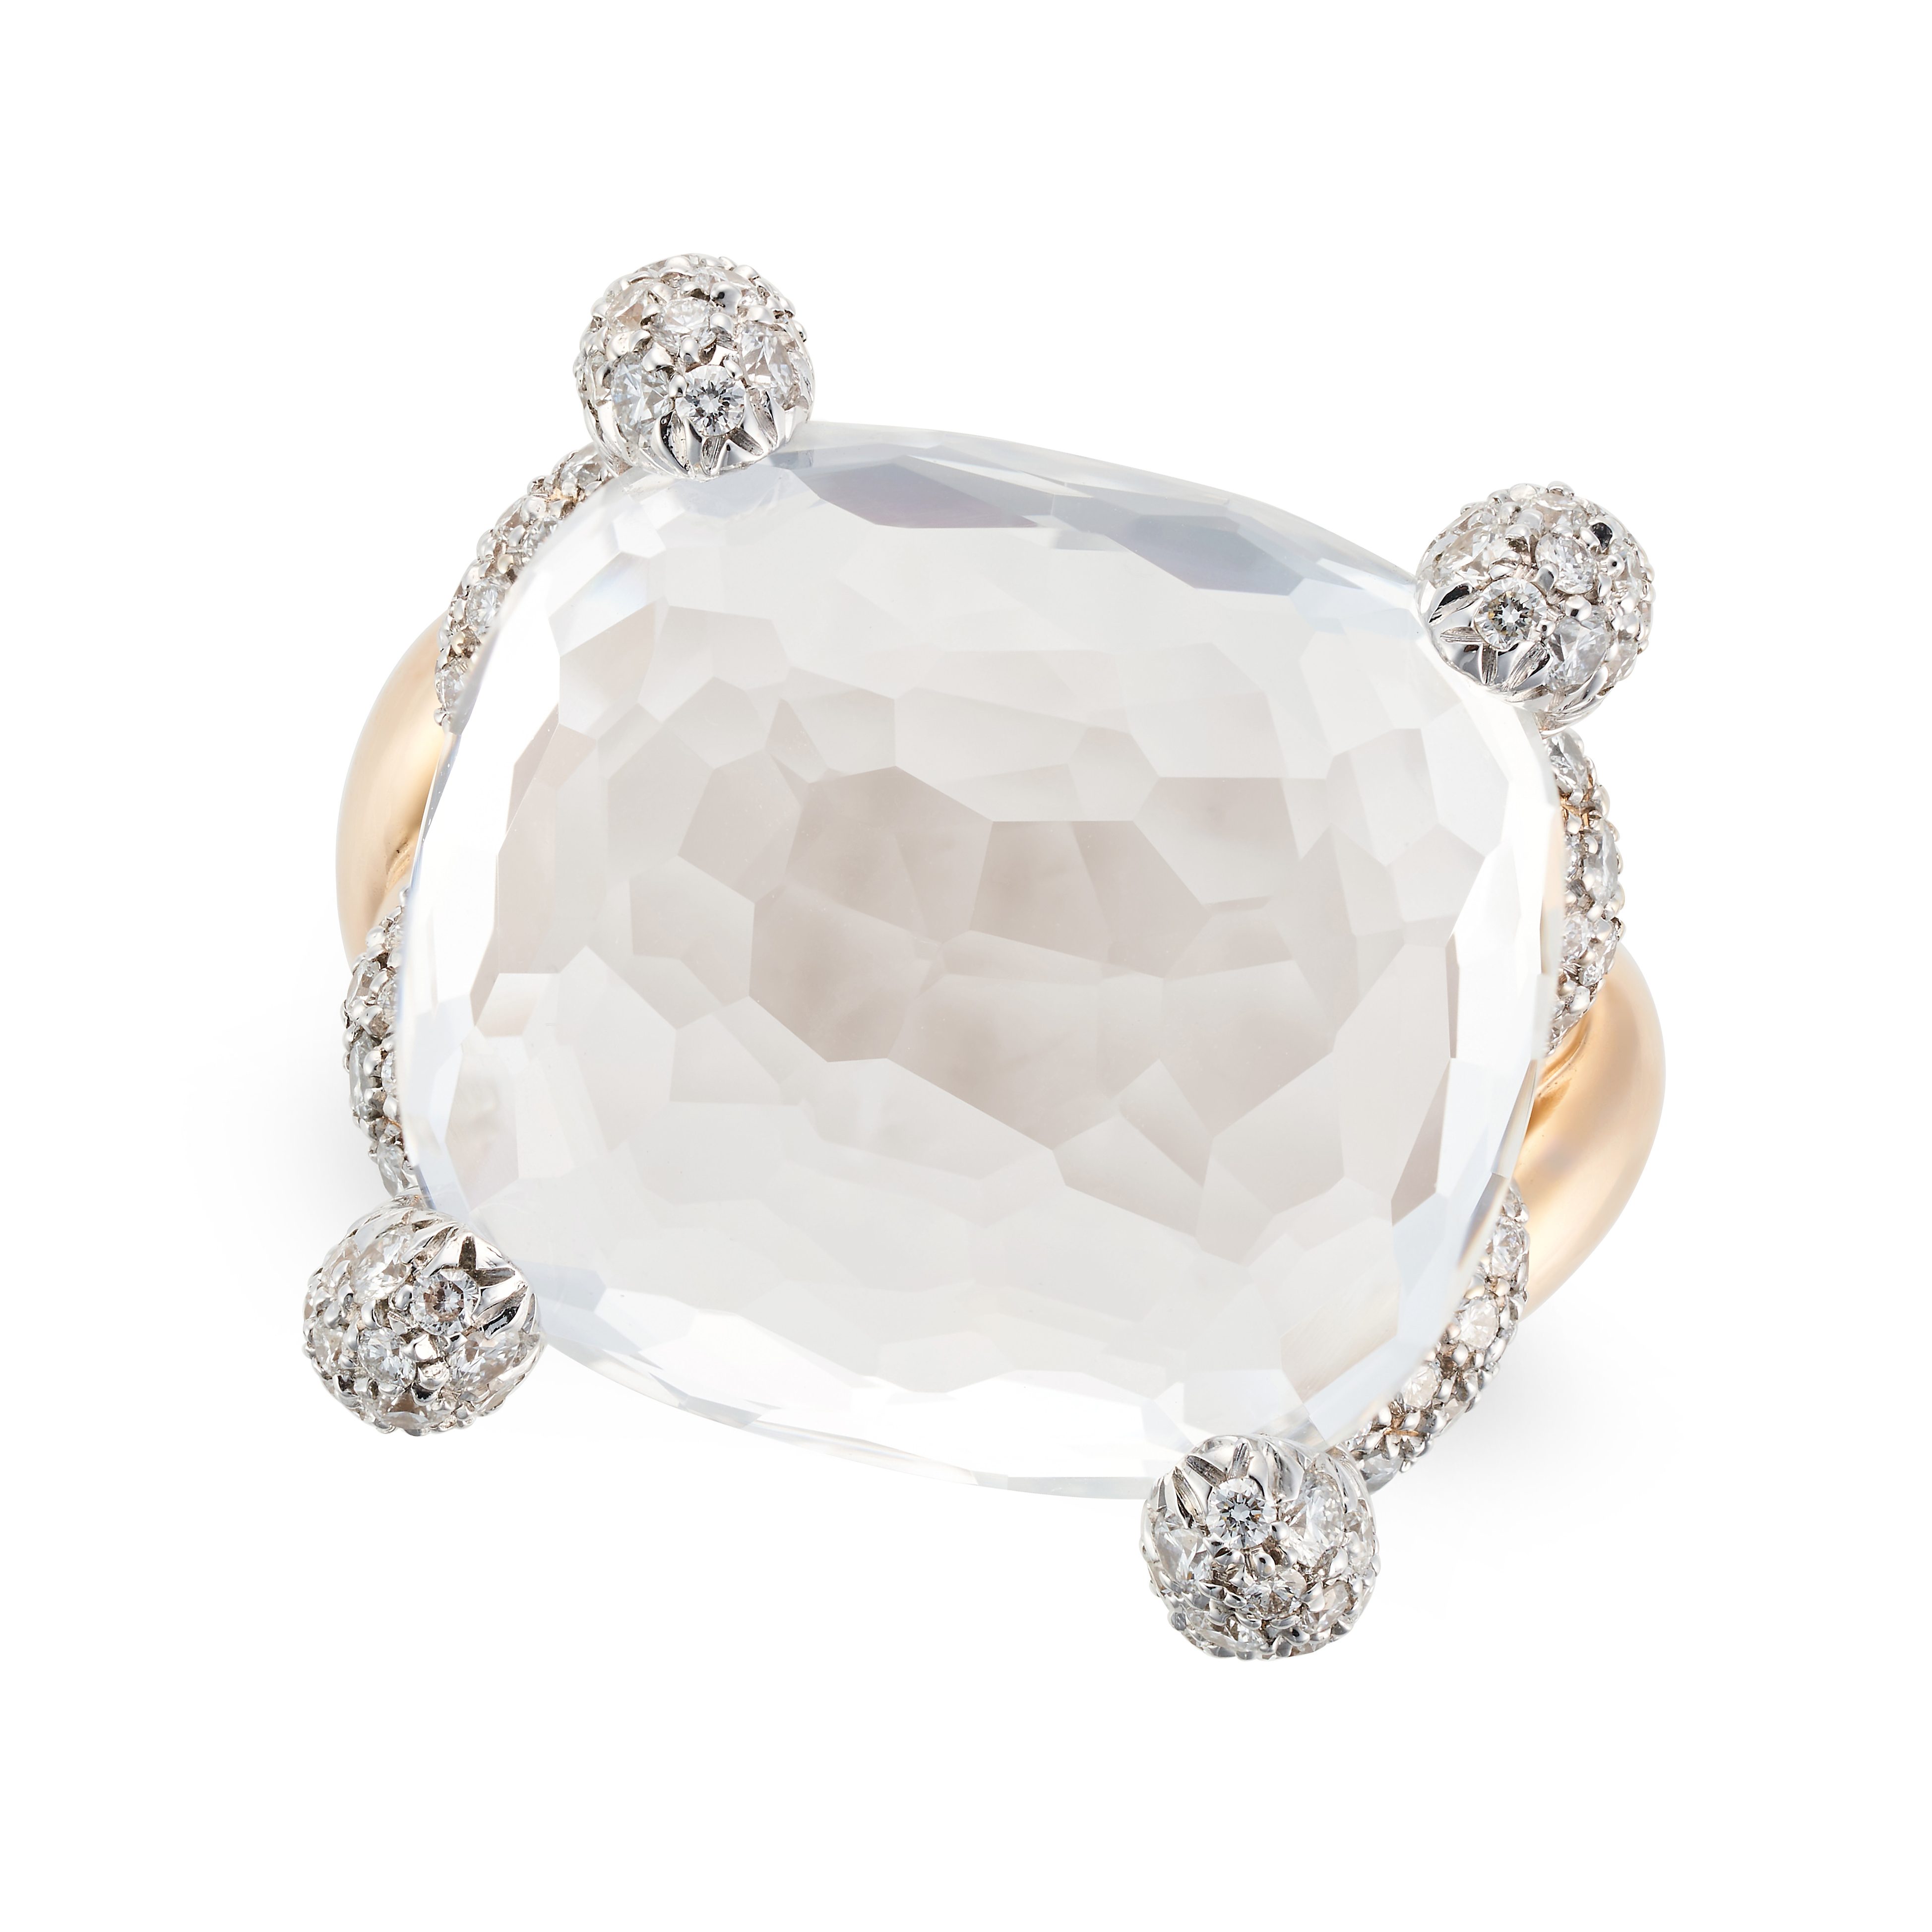 POMELLATO, A ROCK CRYSTAL AND DIAMOND DRESS RING set with a fancy cut rock crystal of approximate... - Image 2 of 2